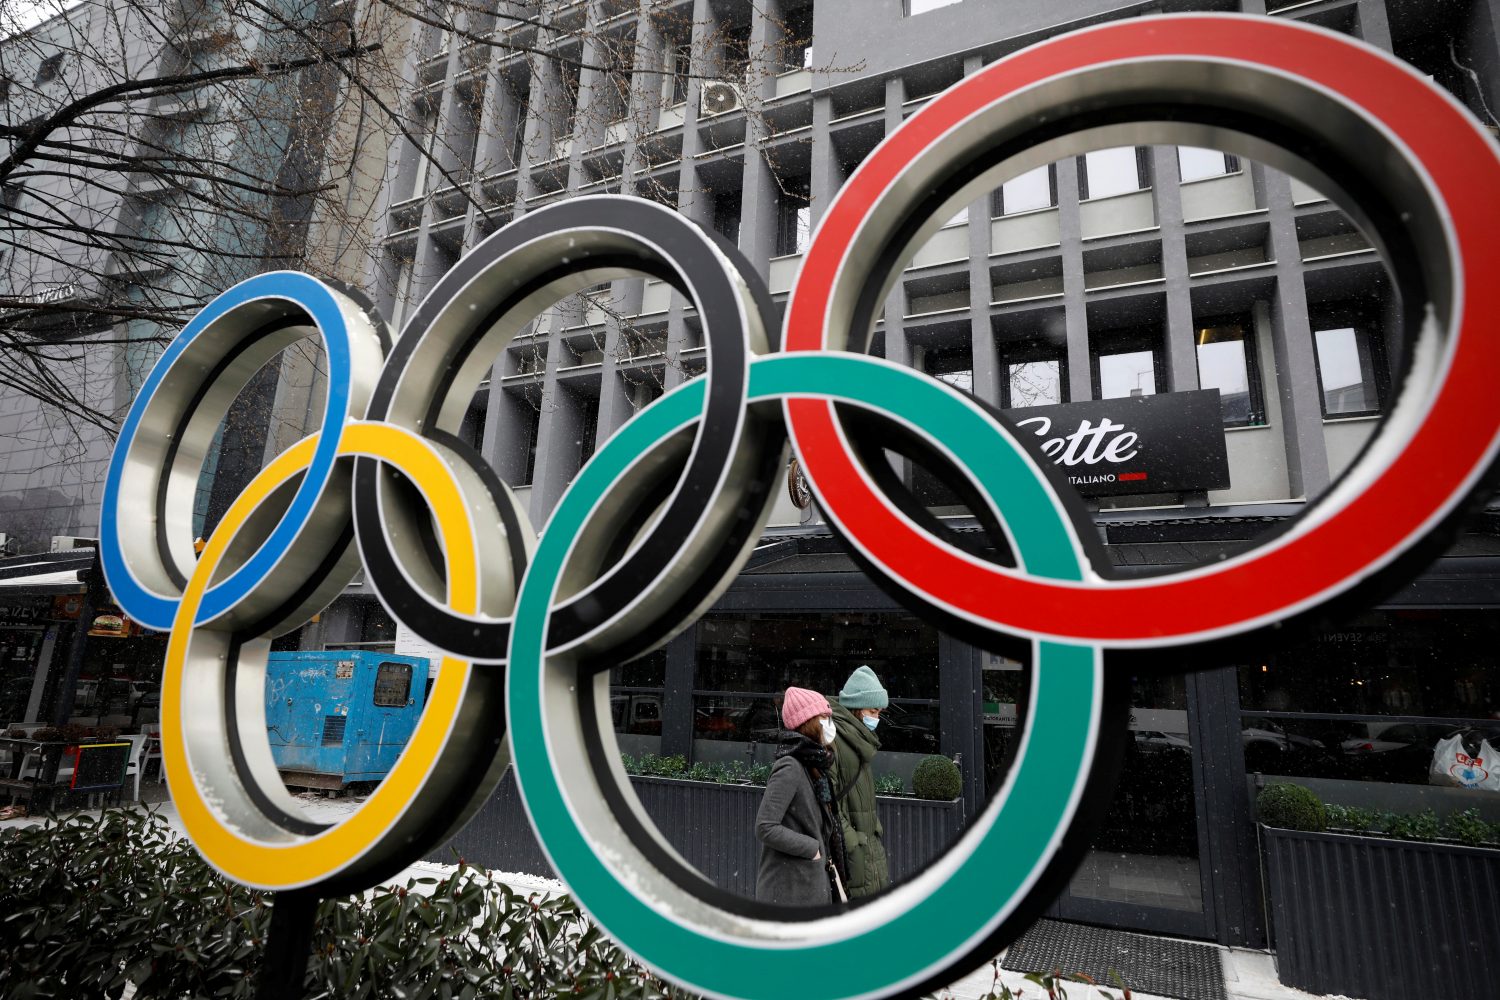 Stay away from Japan, US urges on eve of Olympic Games